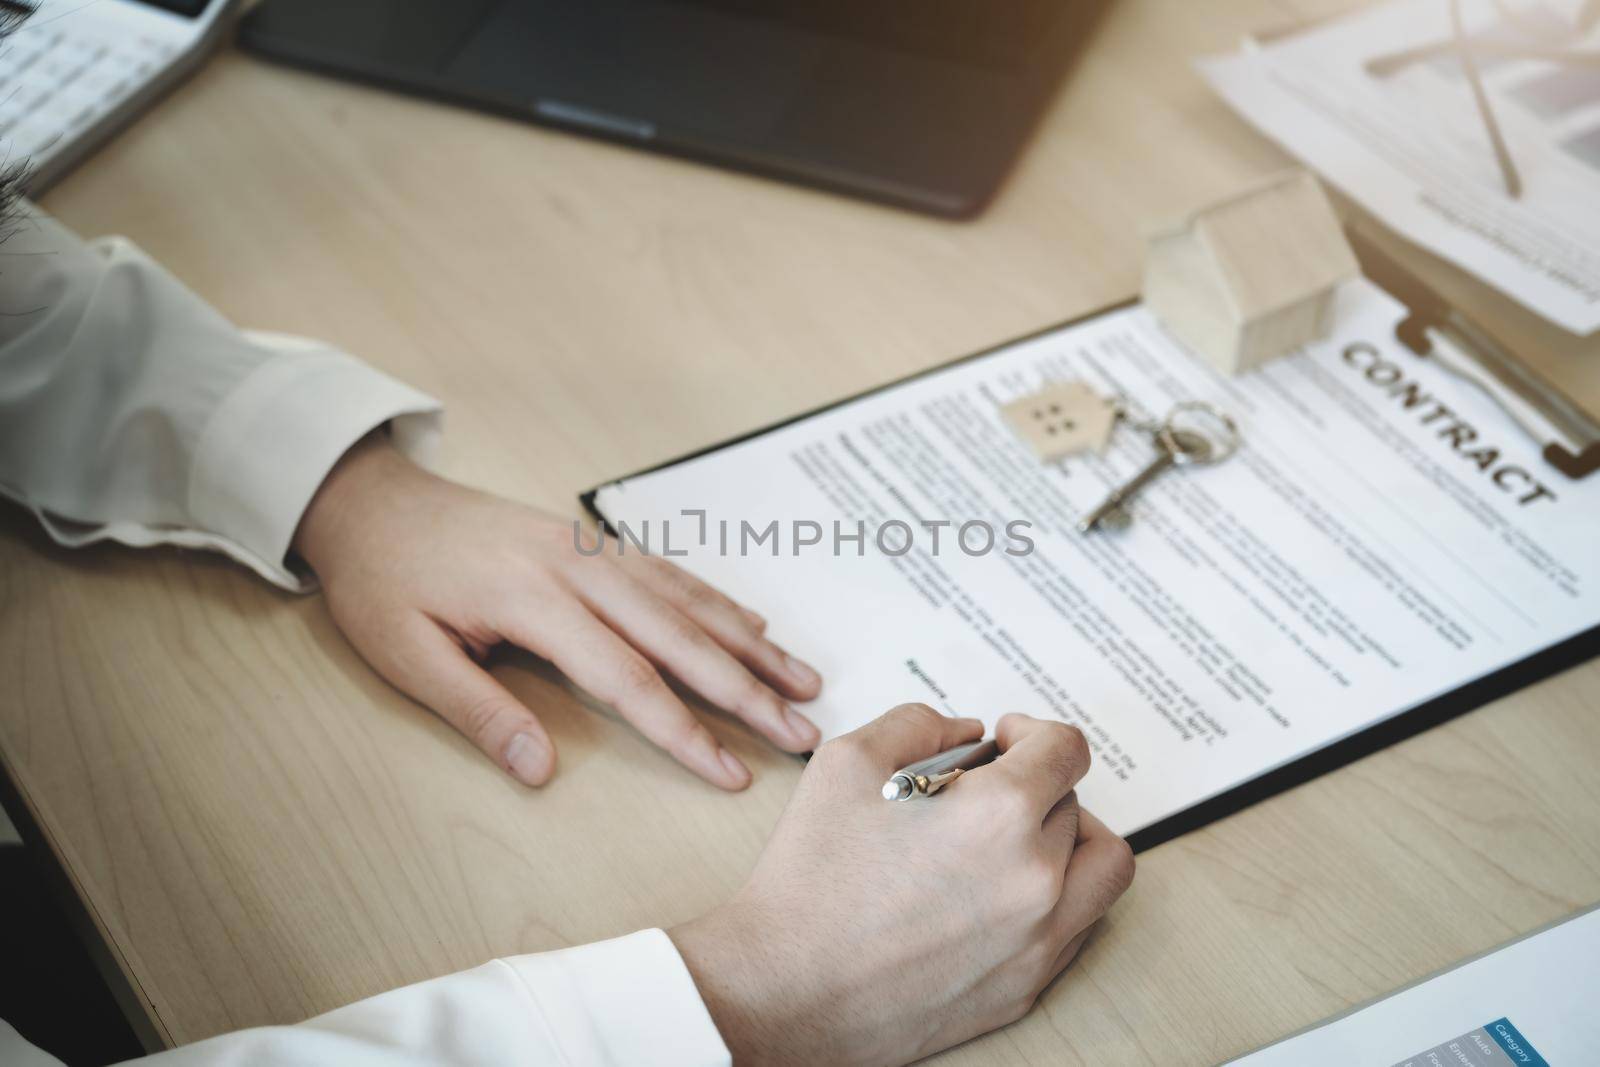 The customer is holding a pen and is reading the housing purchase contract before signing it